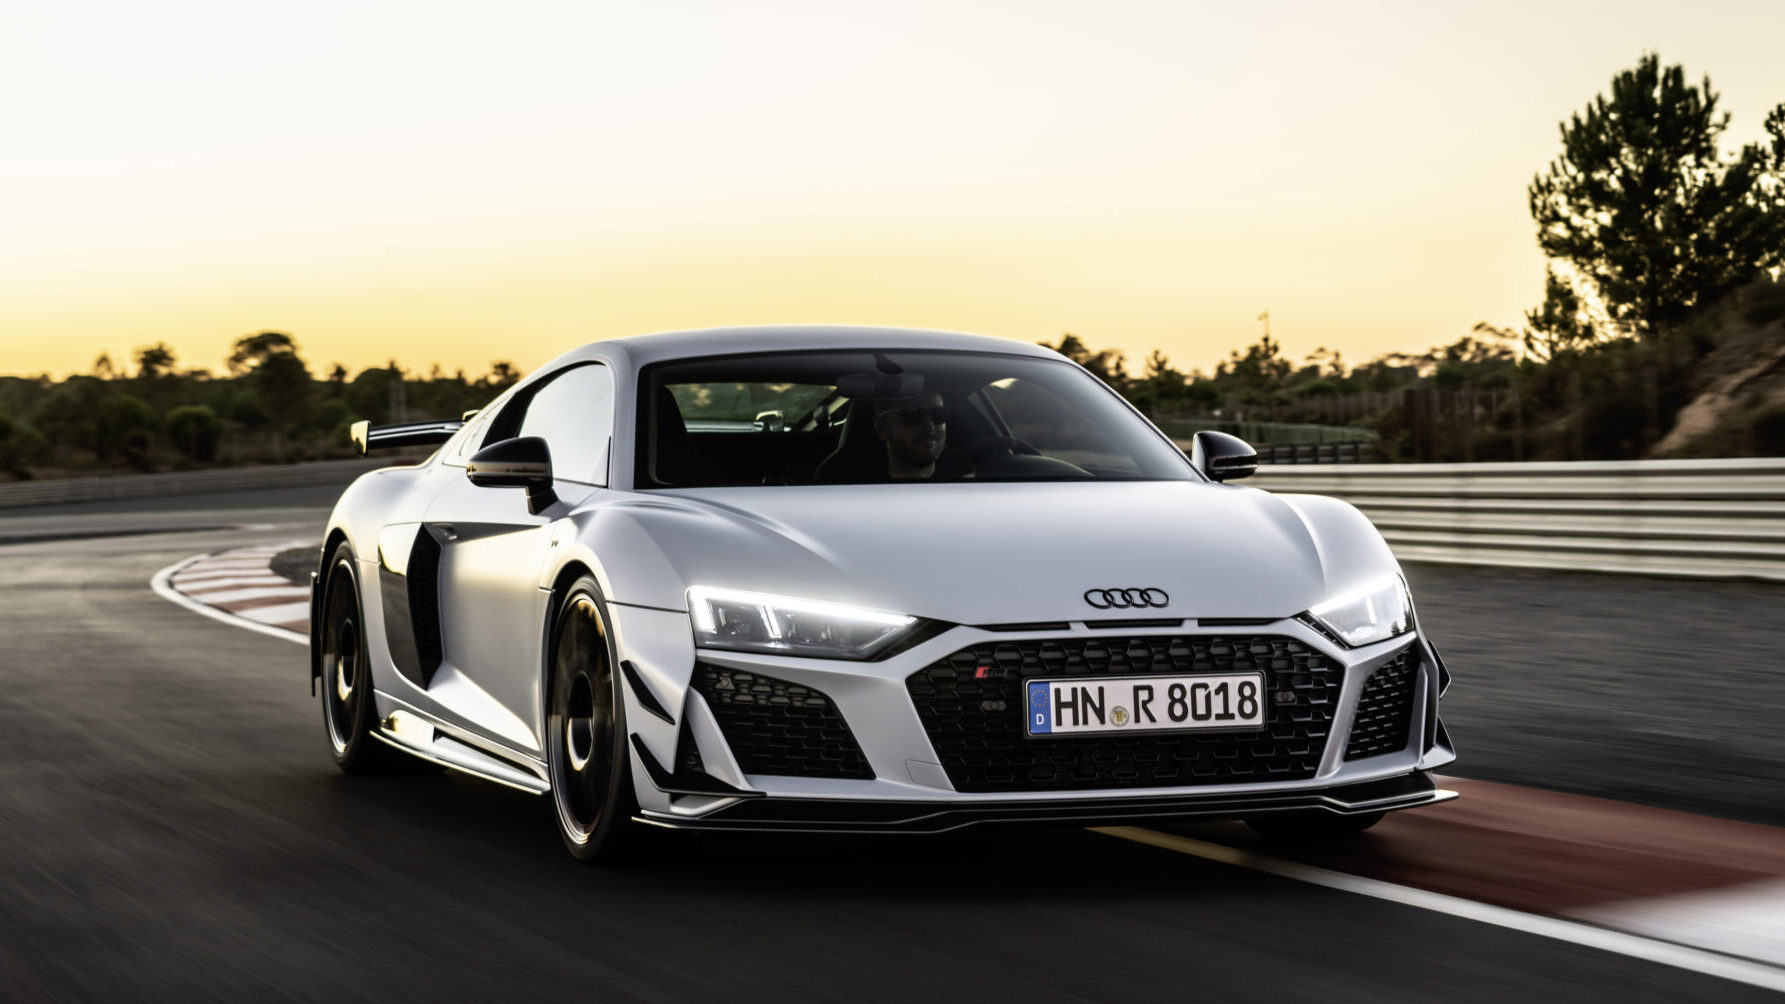 Audi Developed a Cheaper R8 With Turbo Five-Cylinder and RWD, Then Killed It